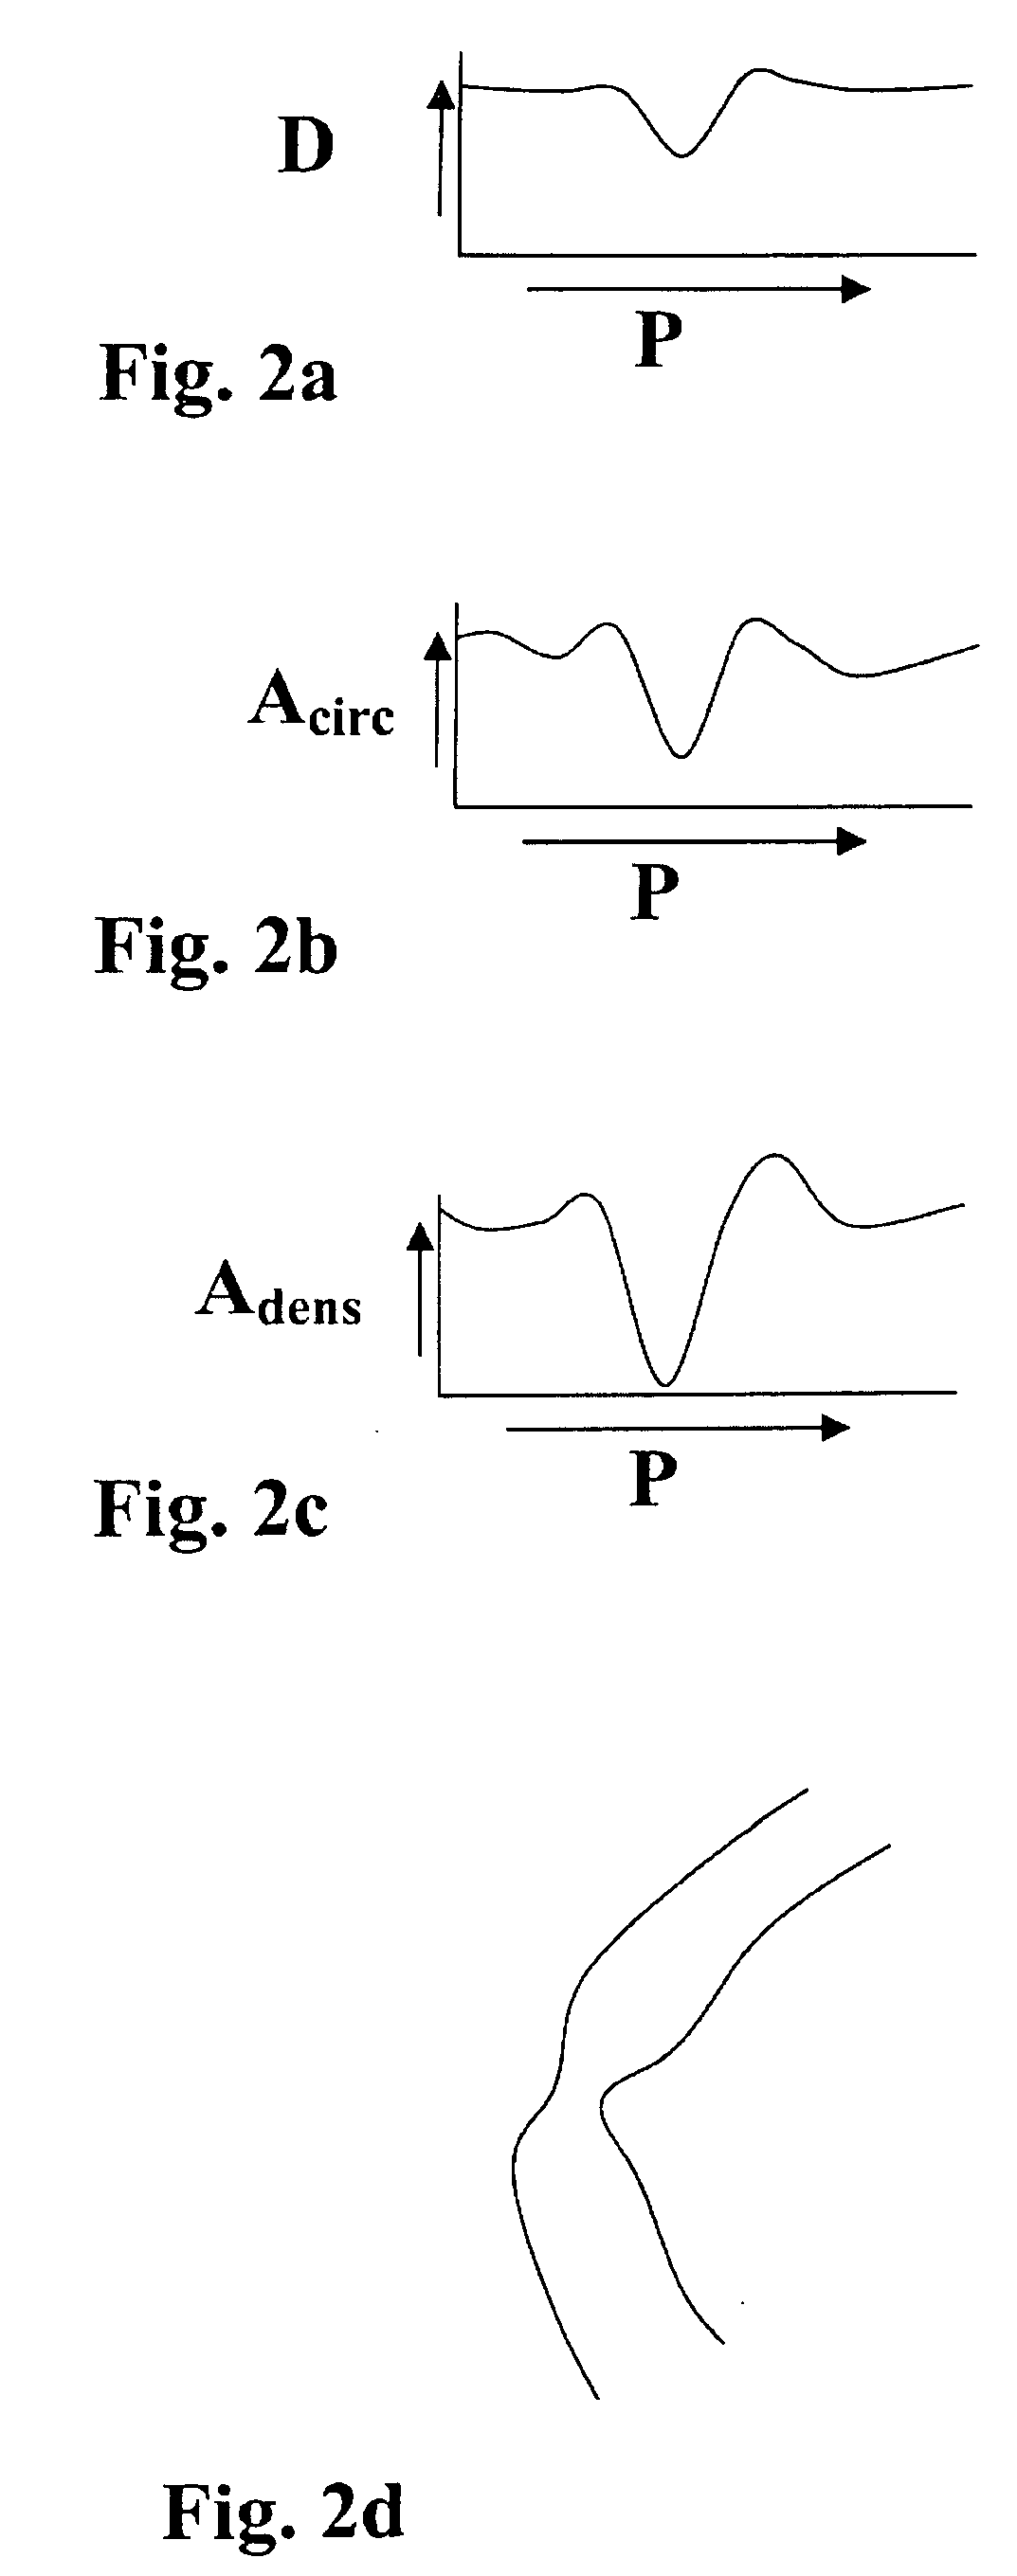 Method, apparatus and computer program for contour detection of vessels using x-ray densitometry